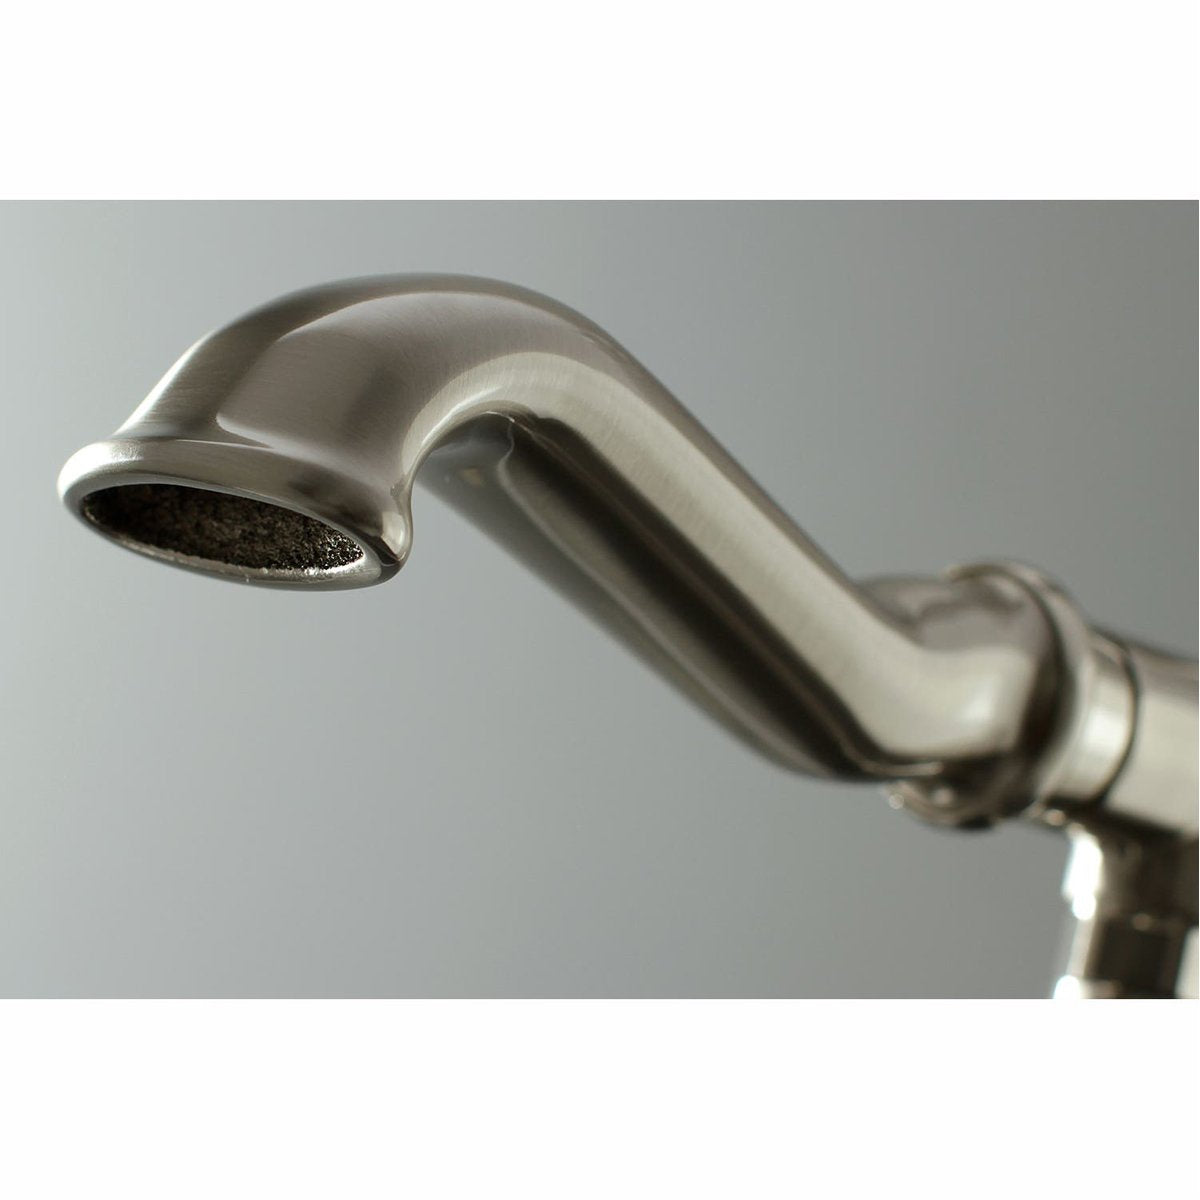 Kingston Brass Royale Single Handle Freestanding Roman Tub Faucet with Hand Shower